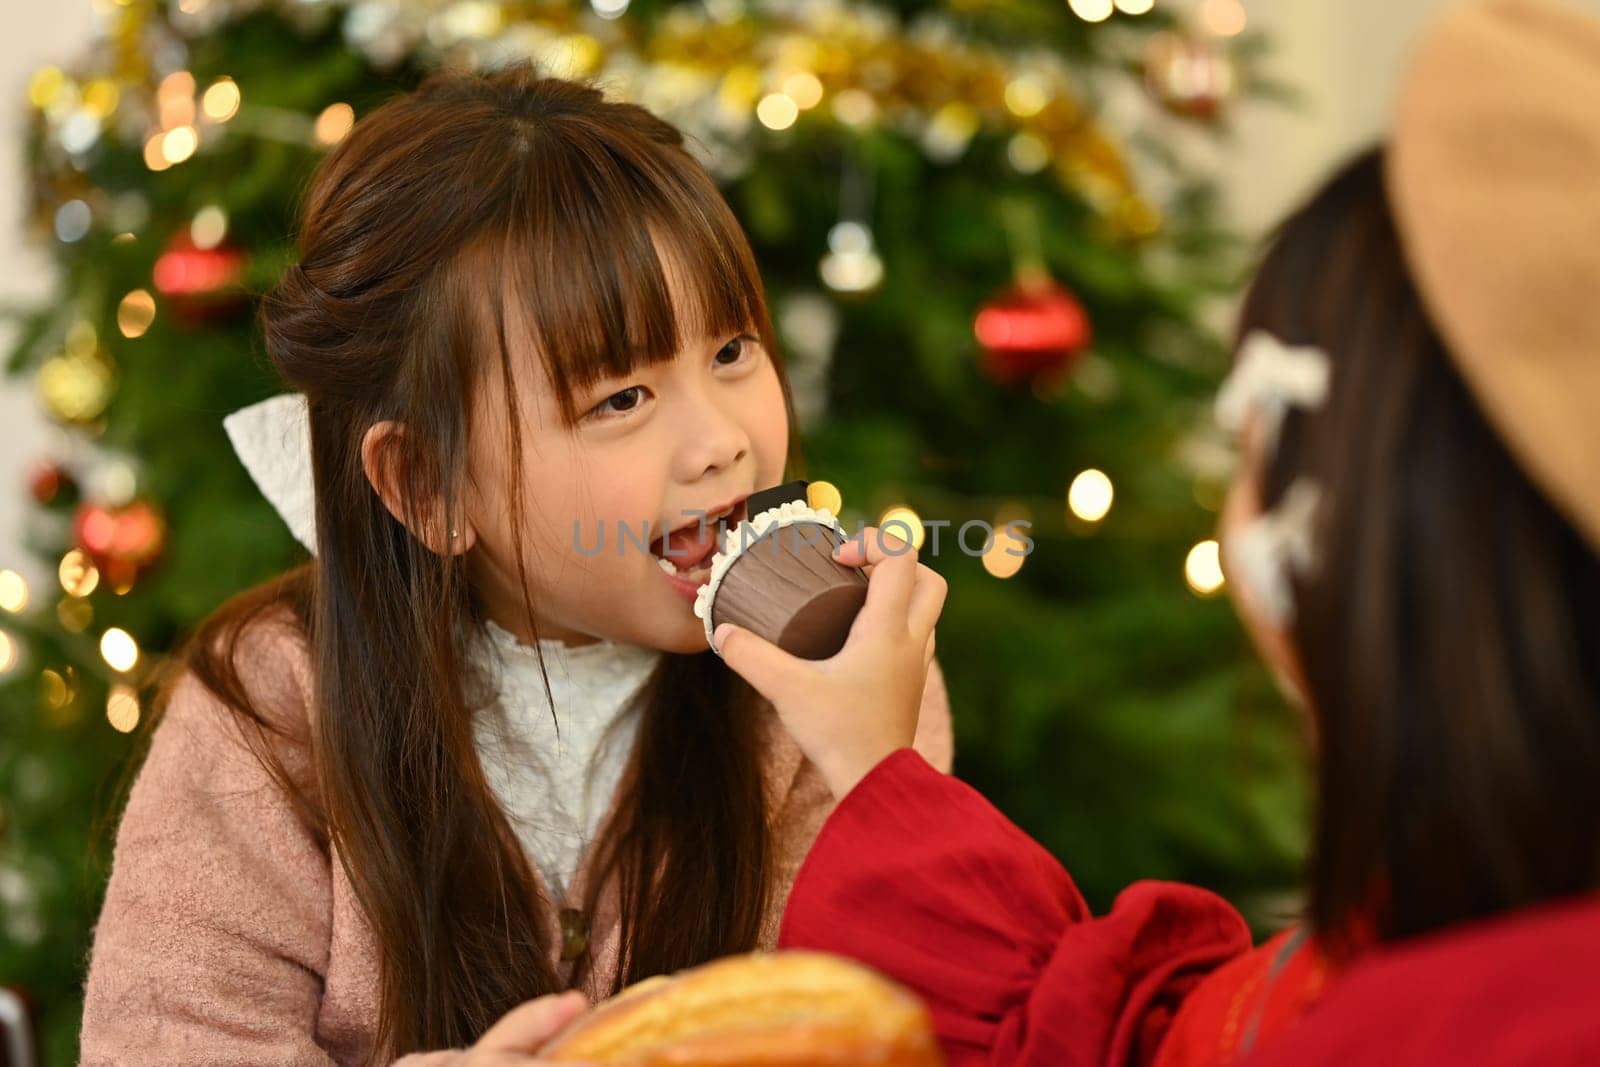 Cute little girl eating cupcake with a beautifully decorated Christmas tree on background.